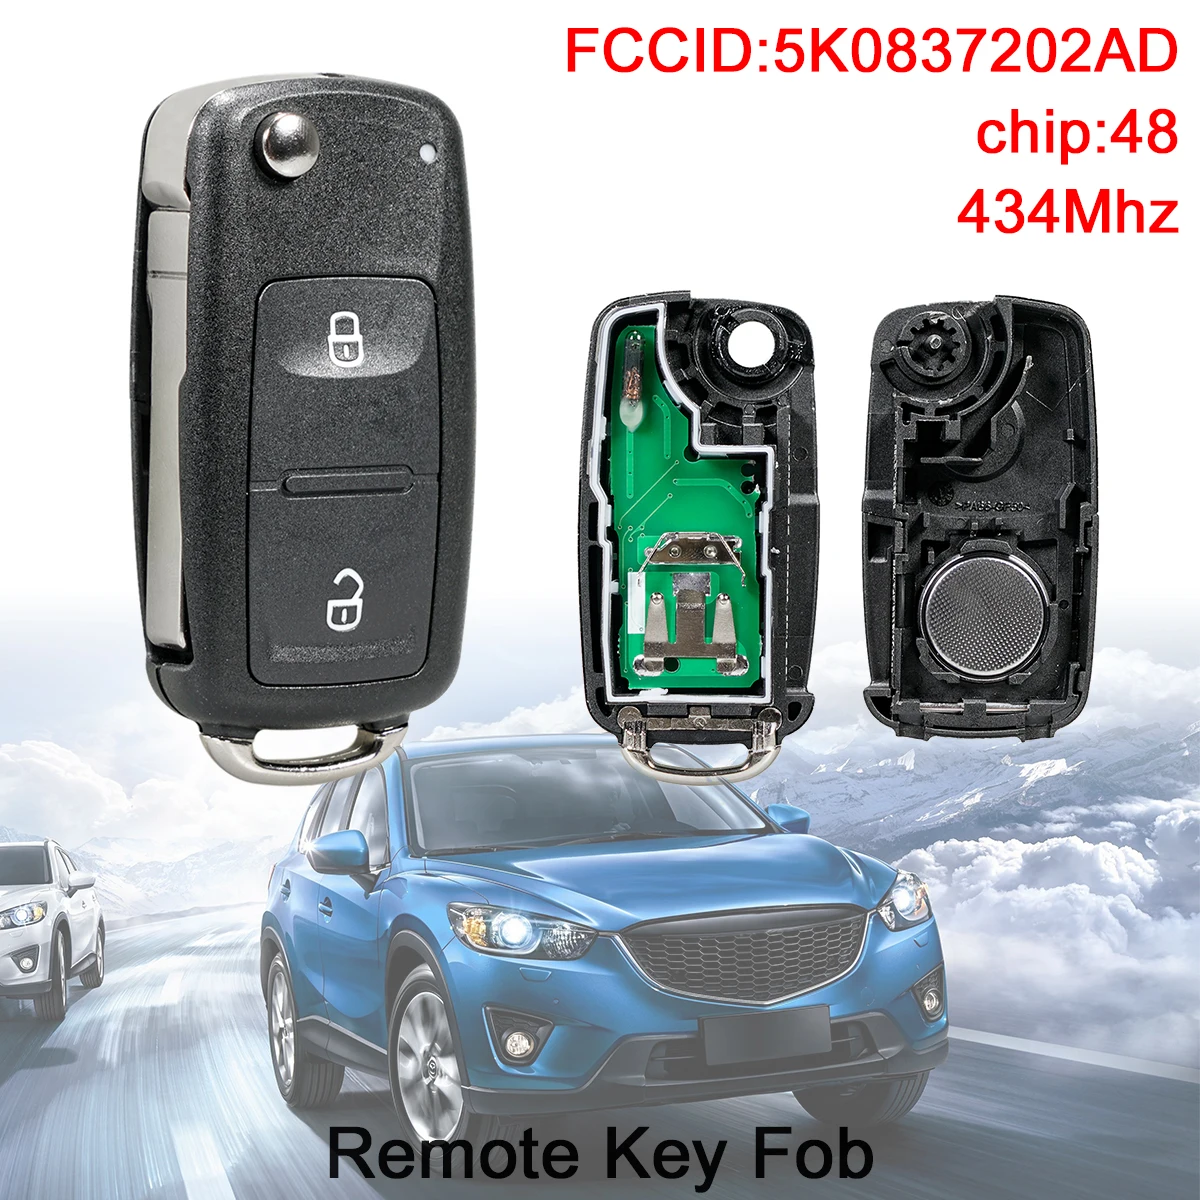 2 Buttons 433MHz  Keyless Smart Remote Car Key Fob with ID48 Chip5K0837202AD Fit for Volkswagen VW  Transporter 2011-2016 car flip folding remote key 433mhz with id48 chip for great wall hover h3 h5 gwm haval h3 h5 steed replacement remote key shell